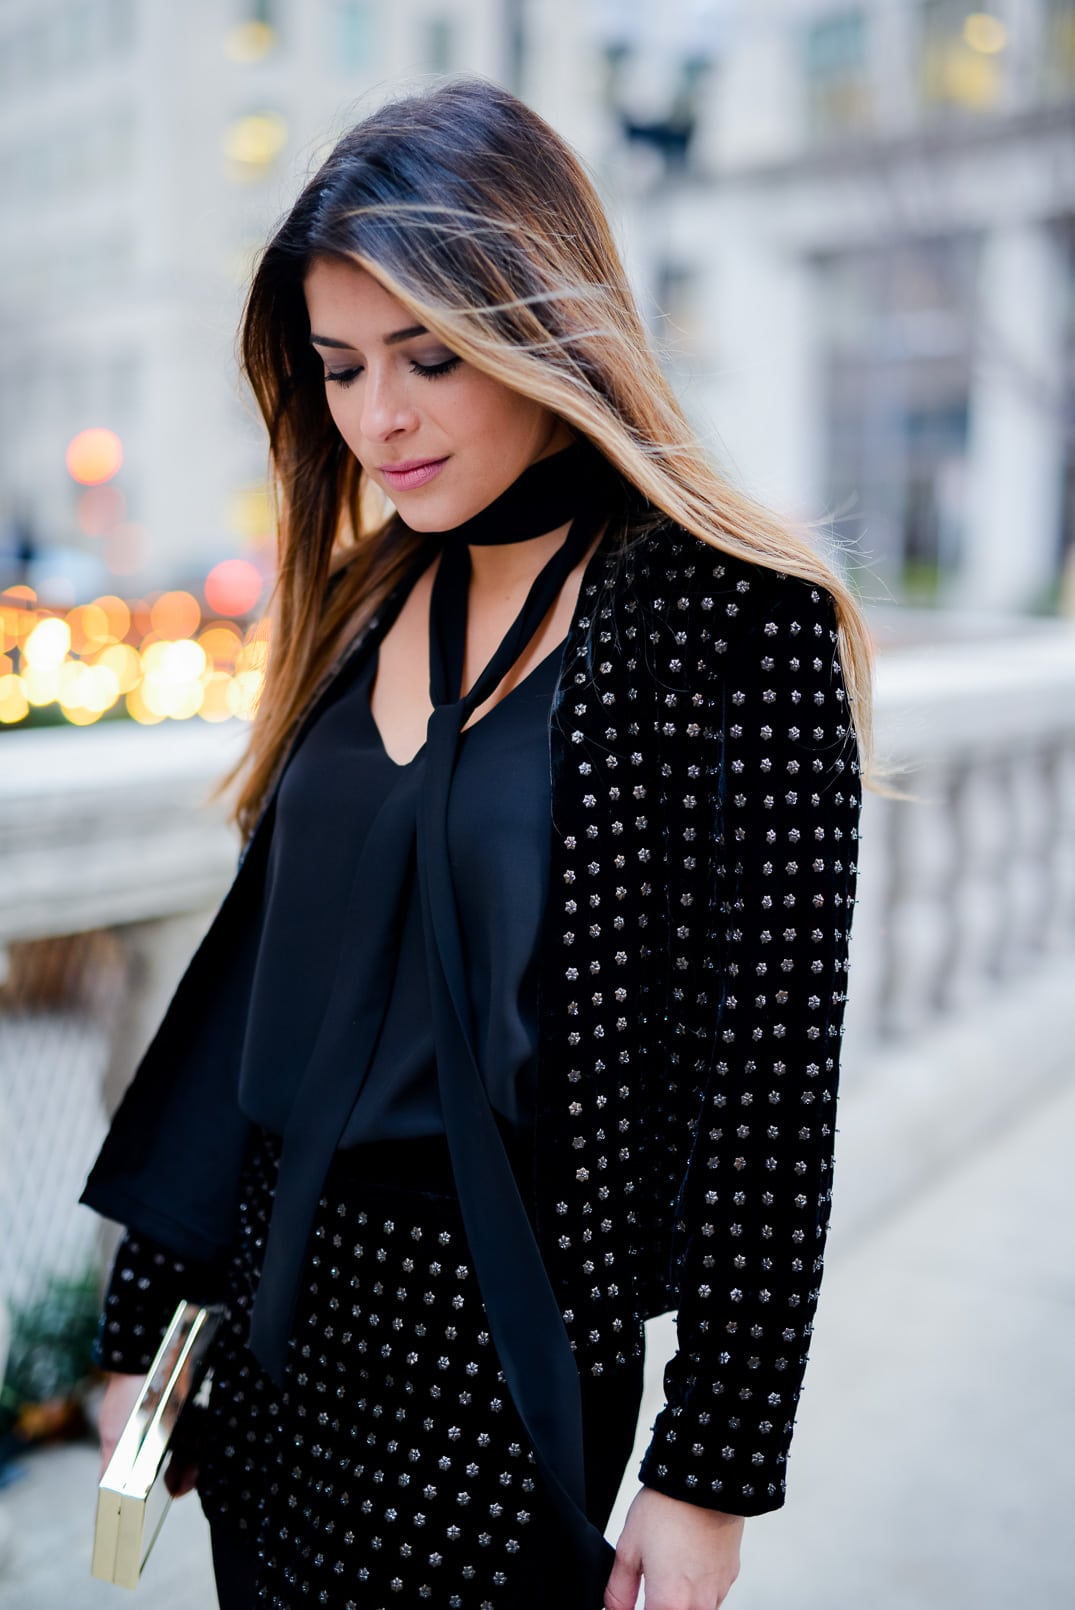 Pam Hetlinger wearing a Topshop Holiday Party Outfit, Velvet studded shorts, velvet studded blazer, skinny scarf and Delman over the knee boots